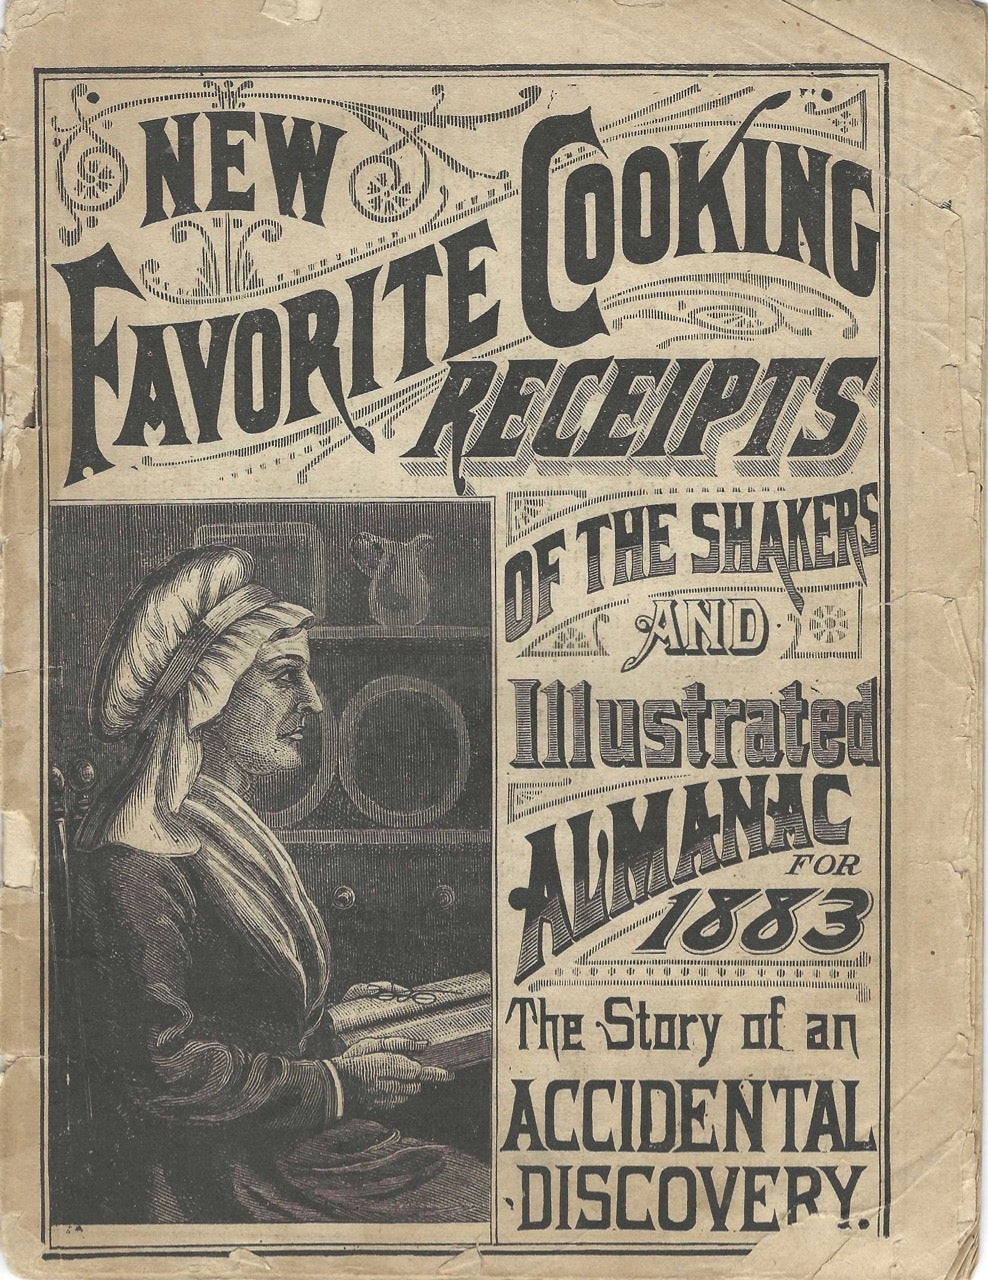 Item #8527 [New Favorite Cooking Receipts of the Shakers and Illustrated Almanac for 1883. The Story of an Accidental Discovery]. Shaker, A. J. White.